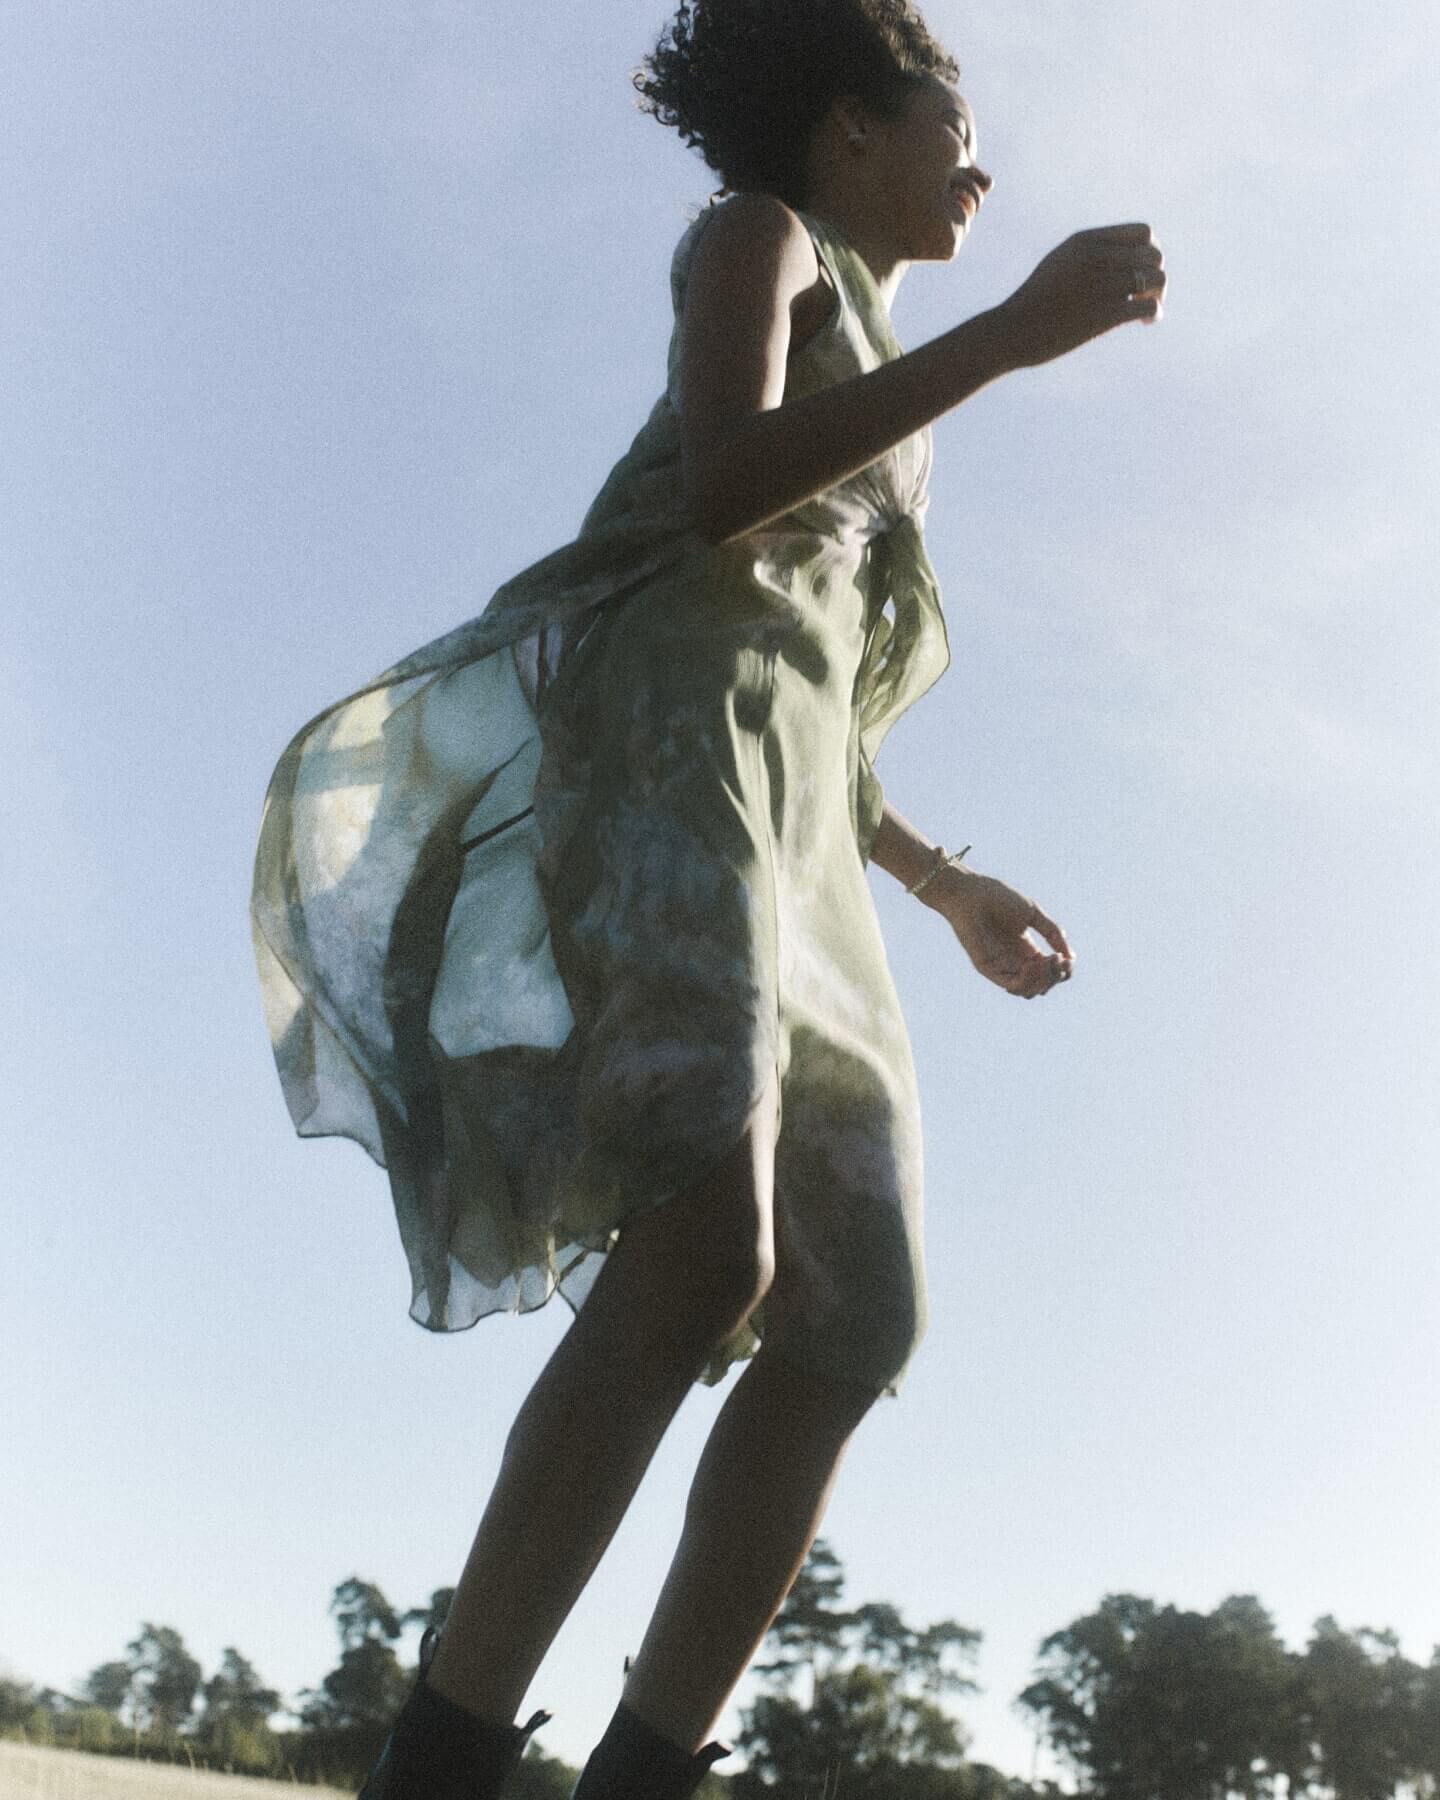 Woman wearing a floral dress swinging in the wind